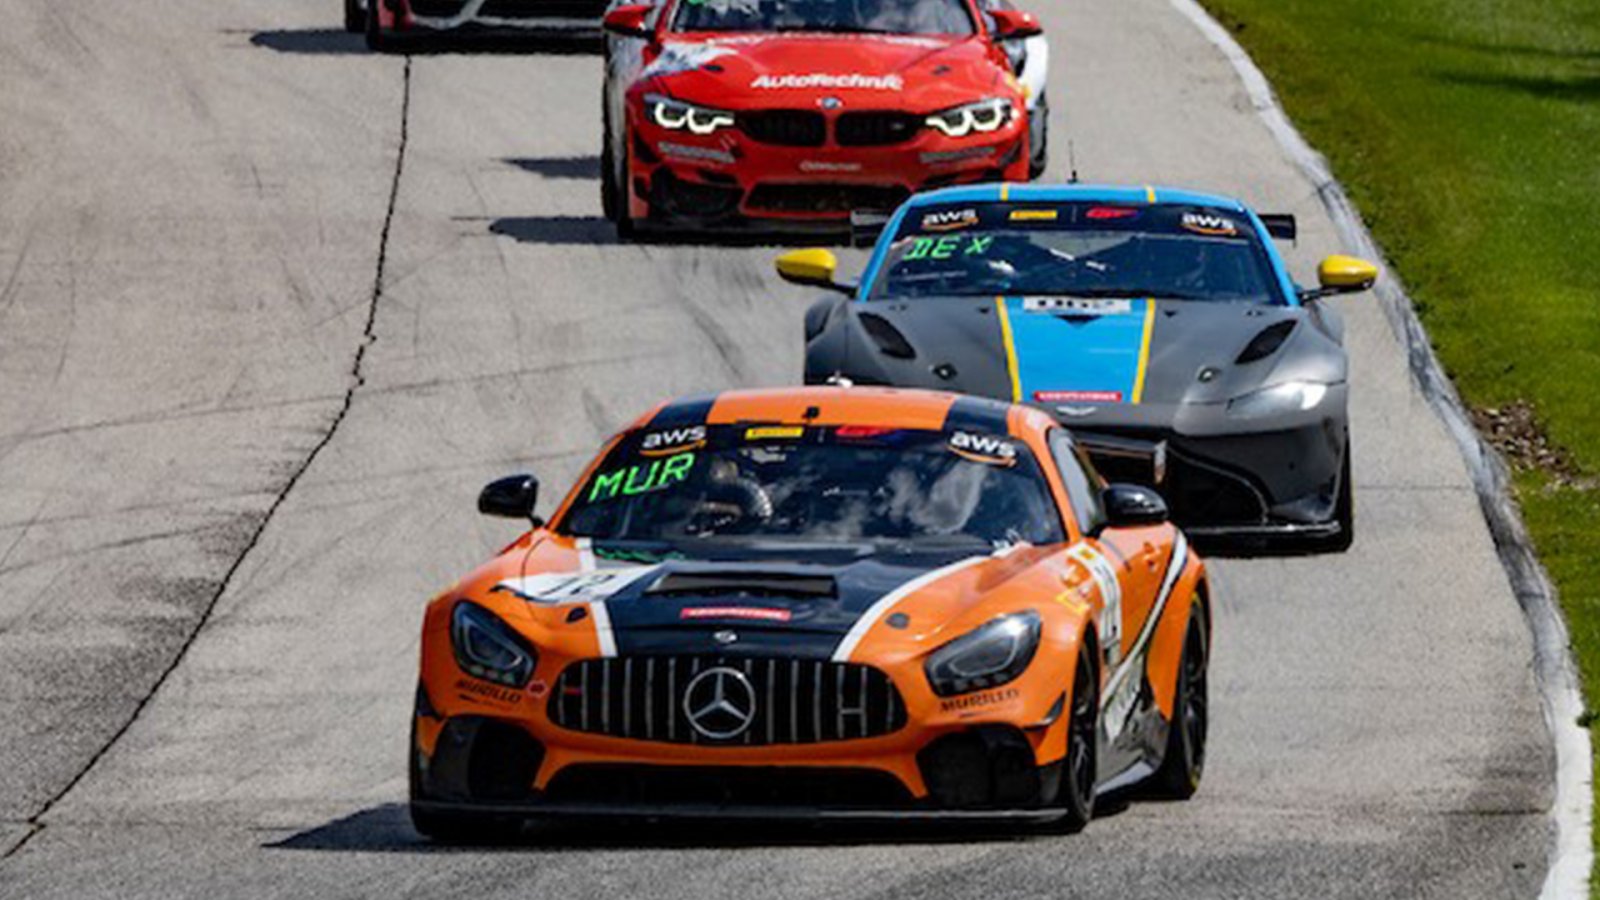 Murillo Racing Mercedes-AMG GT4 Team’s Saturday Pirelli GT4 America Class Victory Anchors Run of Six Podium Finishes for Mercedes-AMG Motorsport Customer Racing Teams this Weekend at Road America